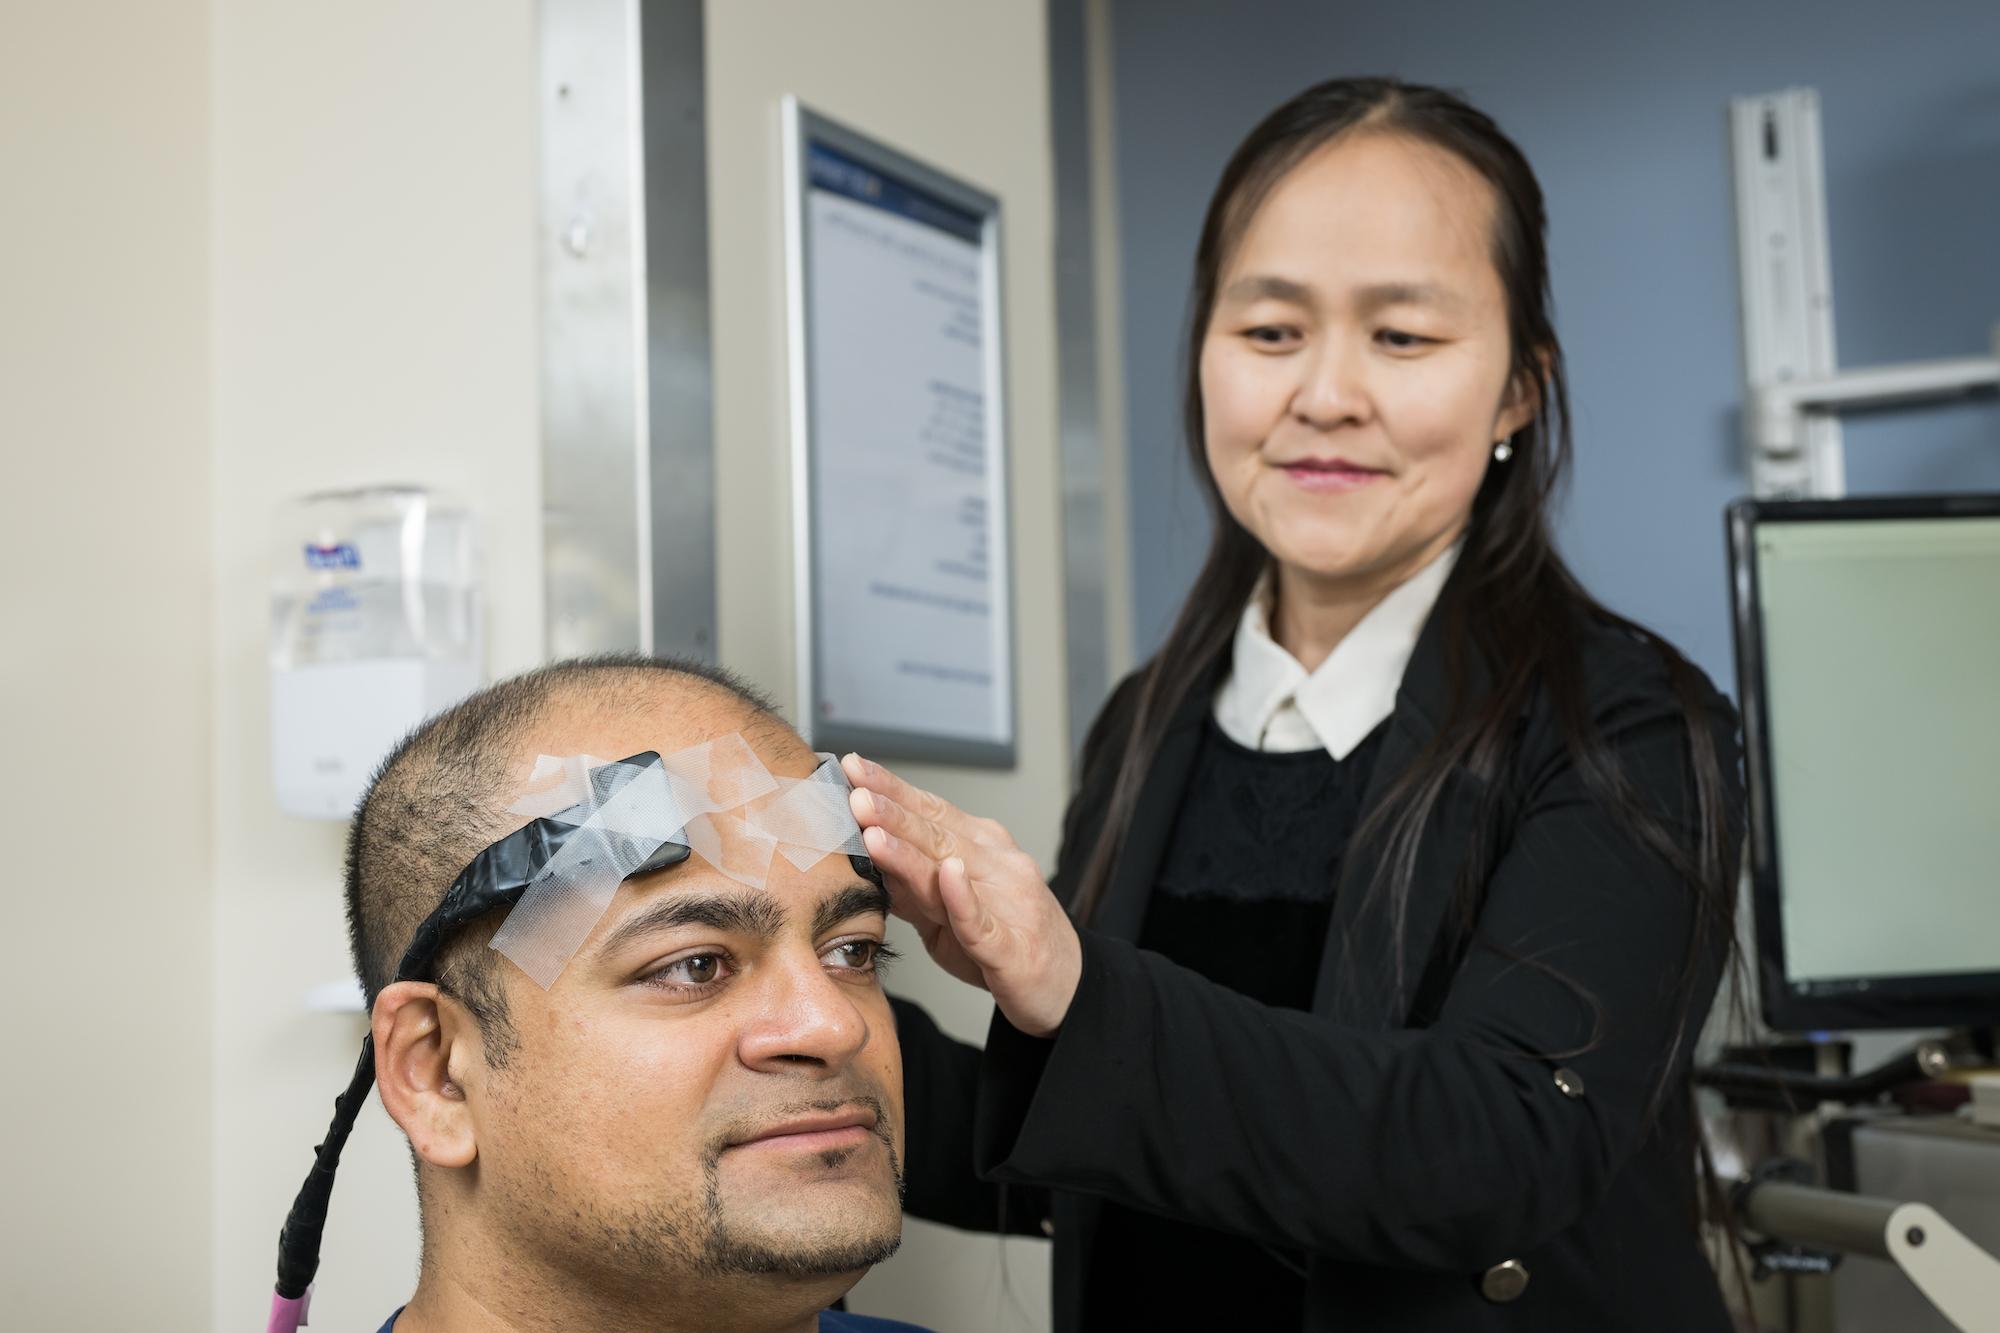 Male researcher models neuro-monitoring device as female researcher affixes device to his head